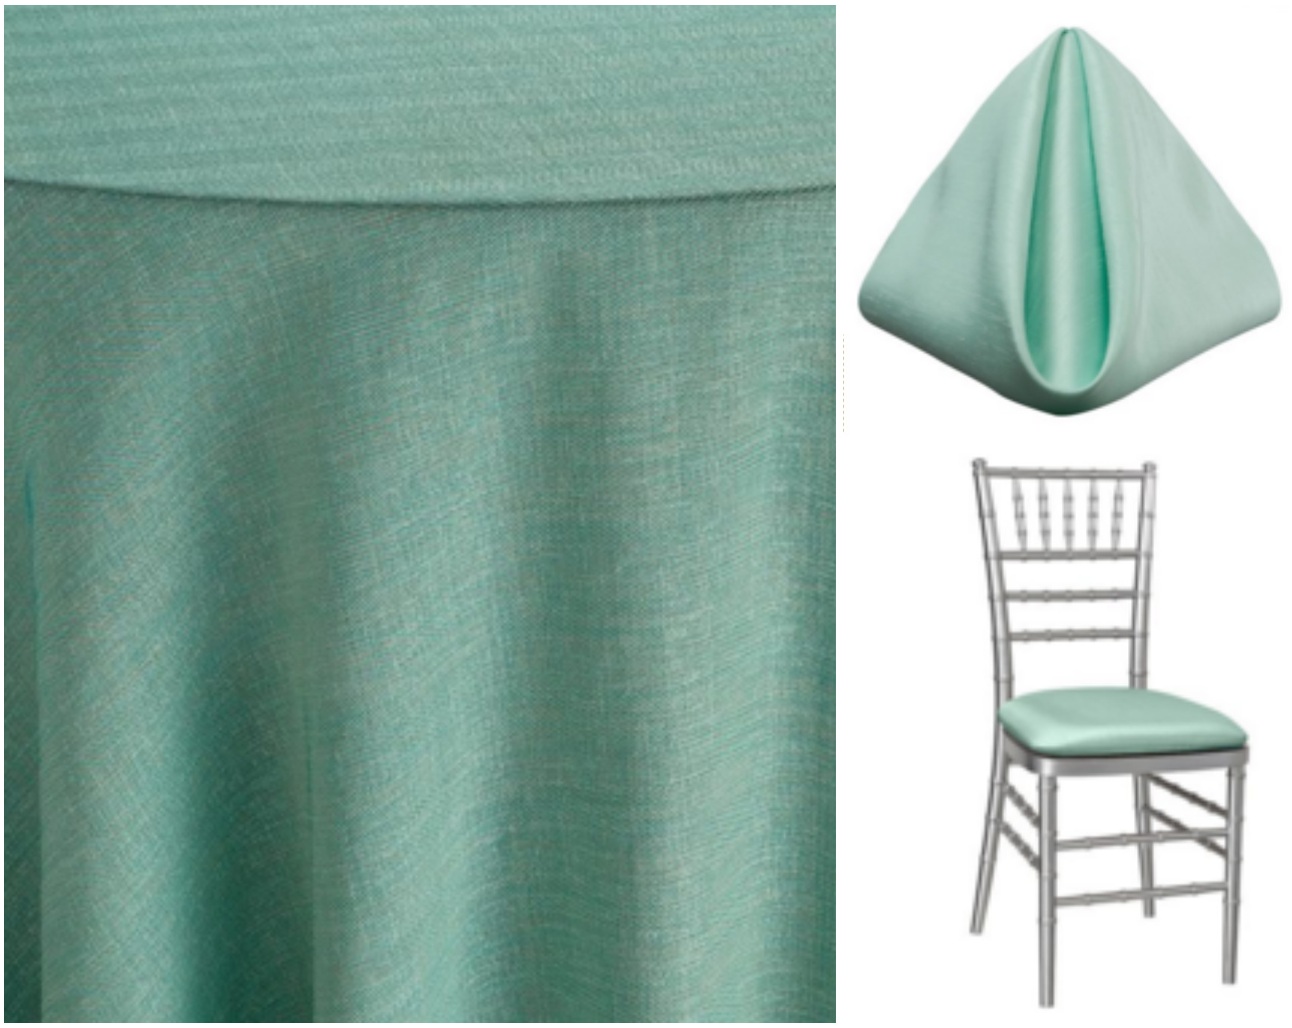 Lagoon Gables Overlay with Julep Shantung Napkin and Elastic Chair Cover | BBJ Linen